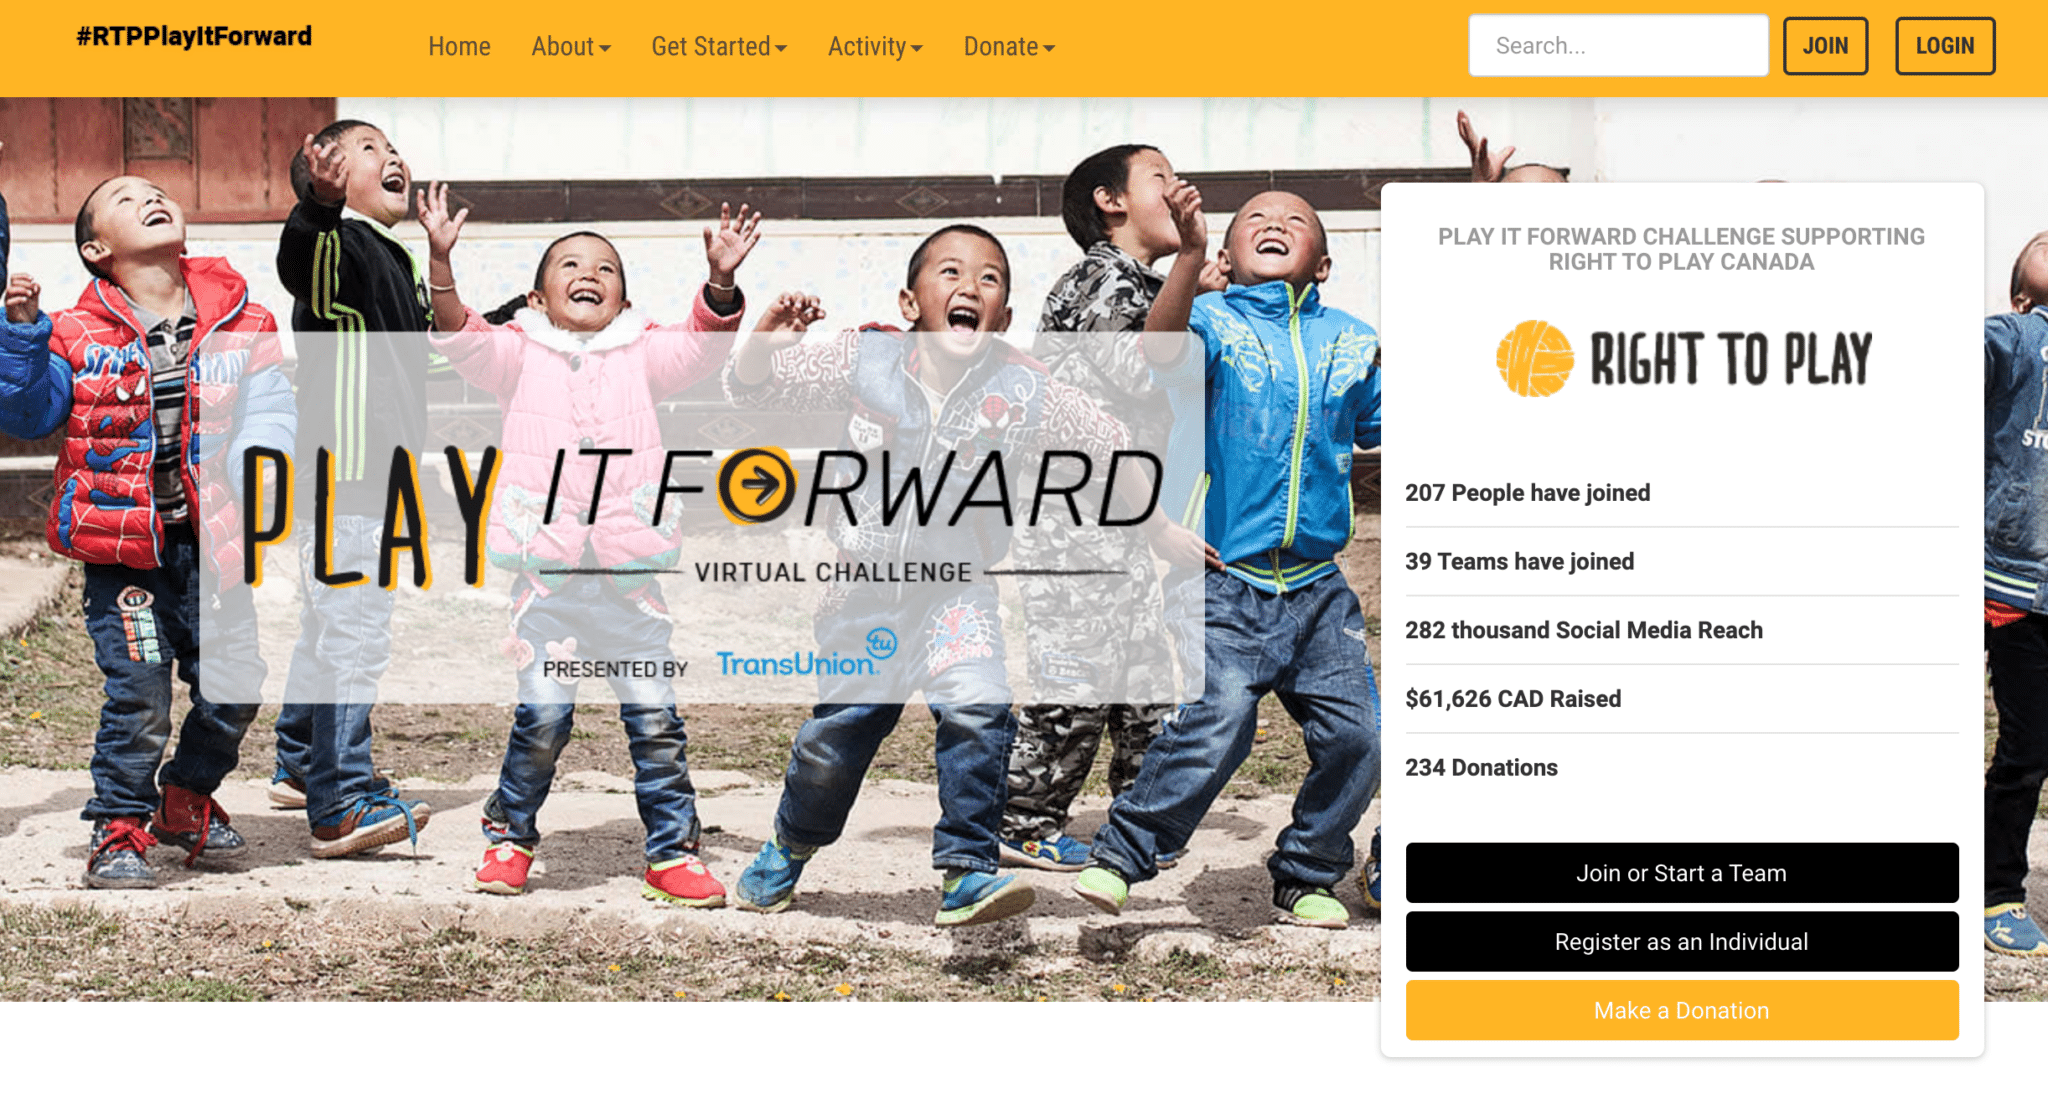 Play it Forward launched a social media based virtual challenge to raise money online.